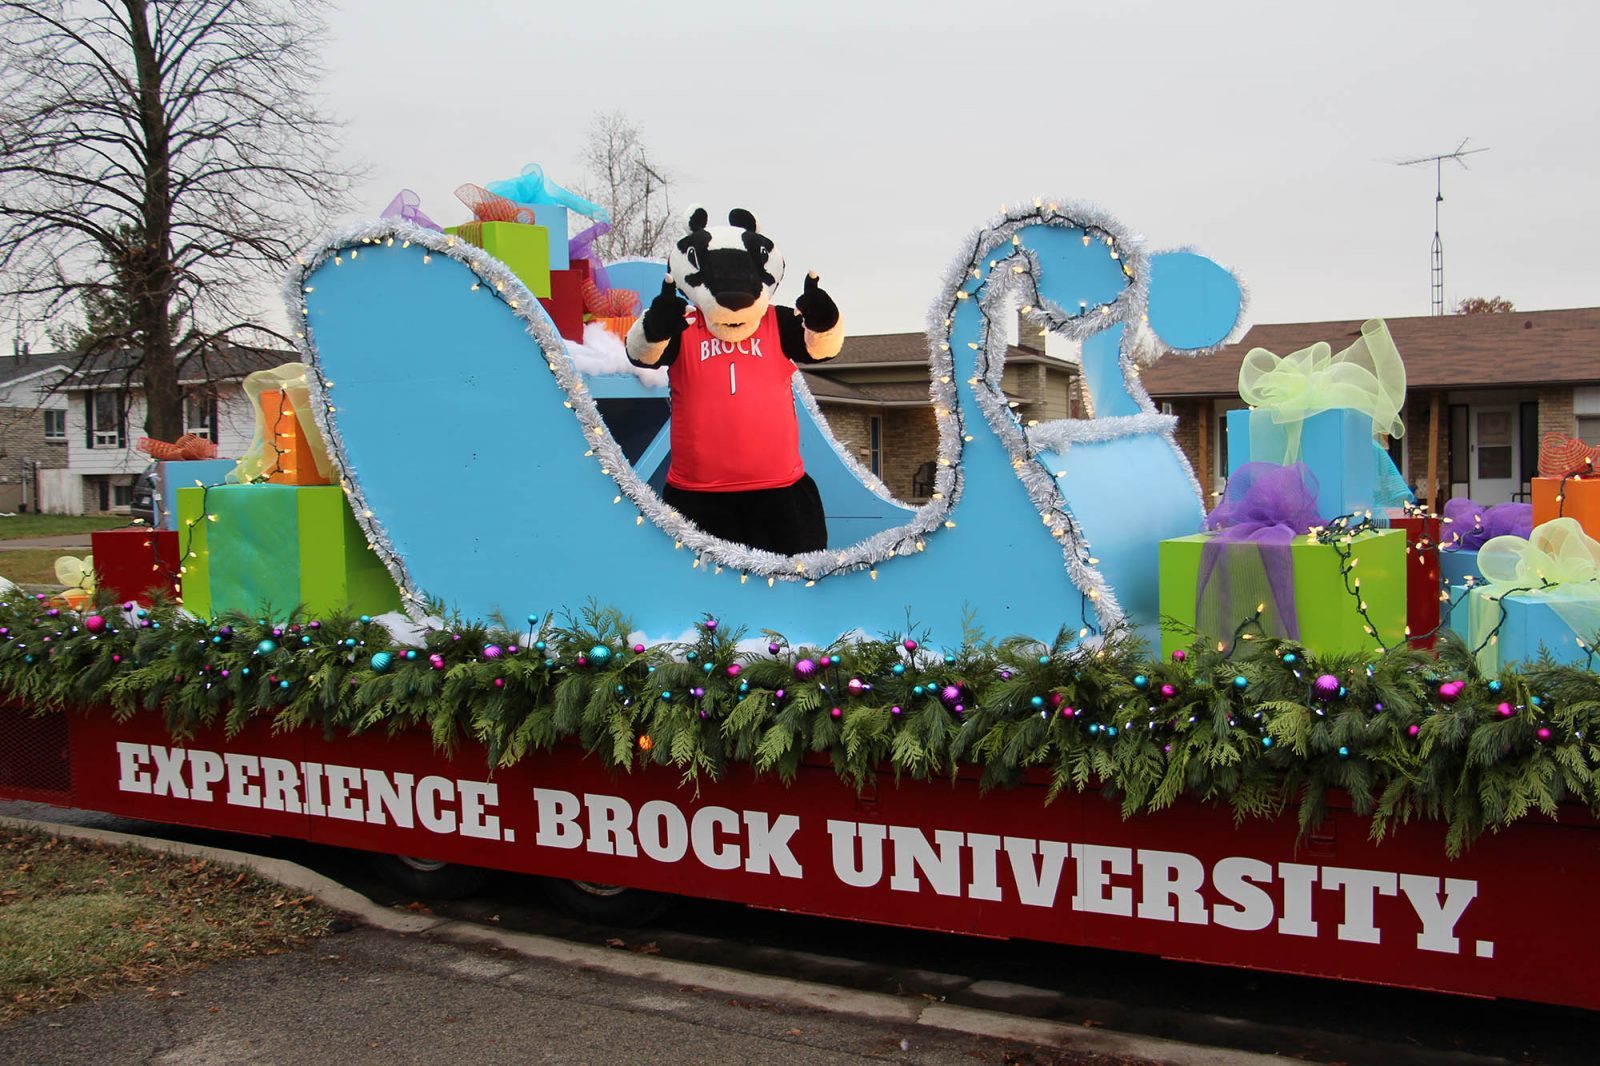 Brock University's mascot, Boomer the Badger, stands in a blue sleigh that sits atop a large holiday parade float. The sleigh is surrounded by oversized presents wrapped in colourful paper and bows.